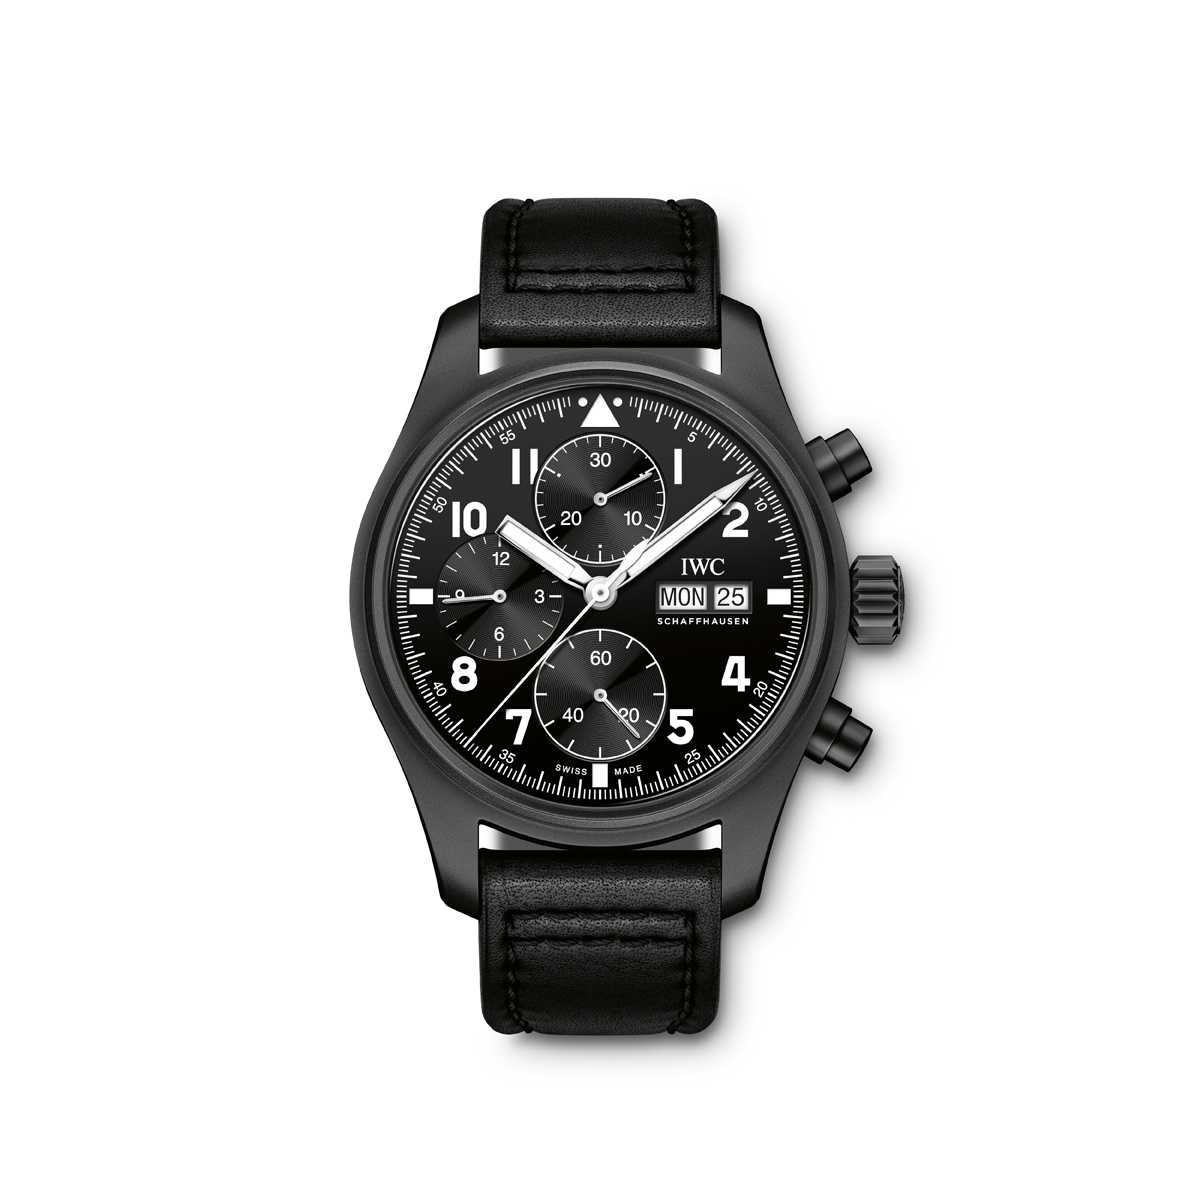 The new Pilot’s Watch Chronograph Edition “Tribute to 3705” from IWC ...